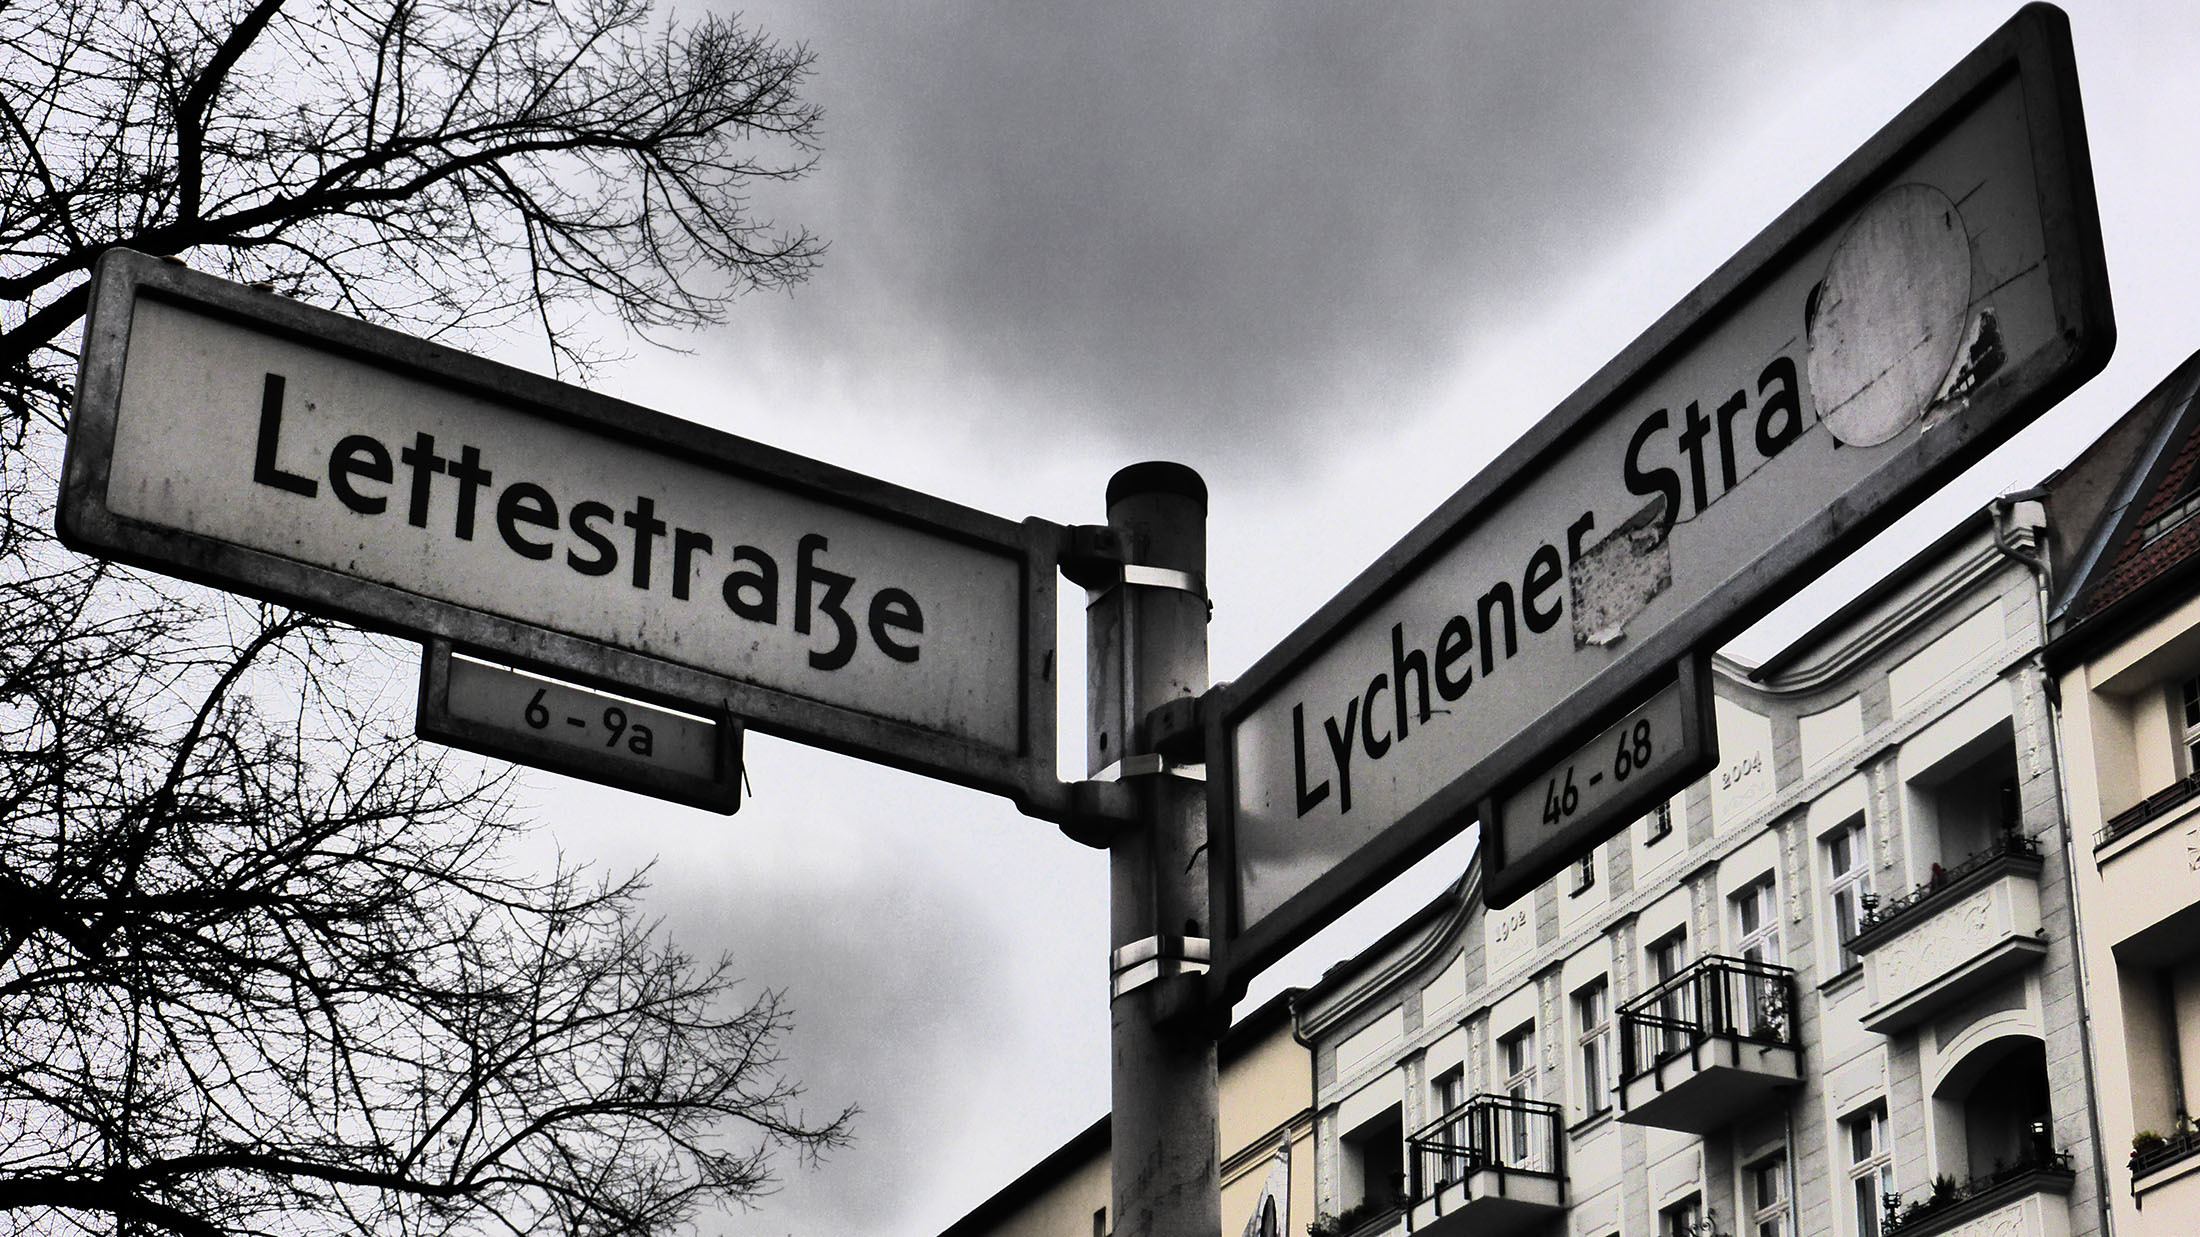 Black and white street sign in Berlin Germany